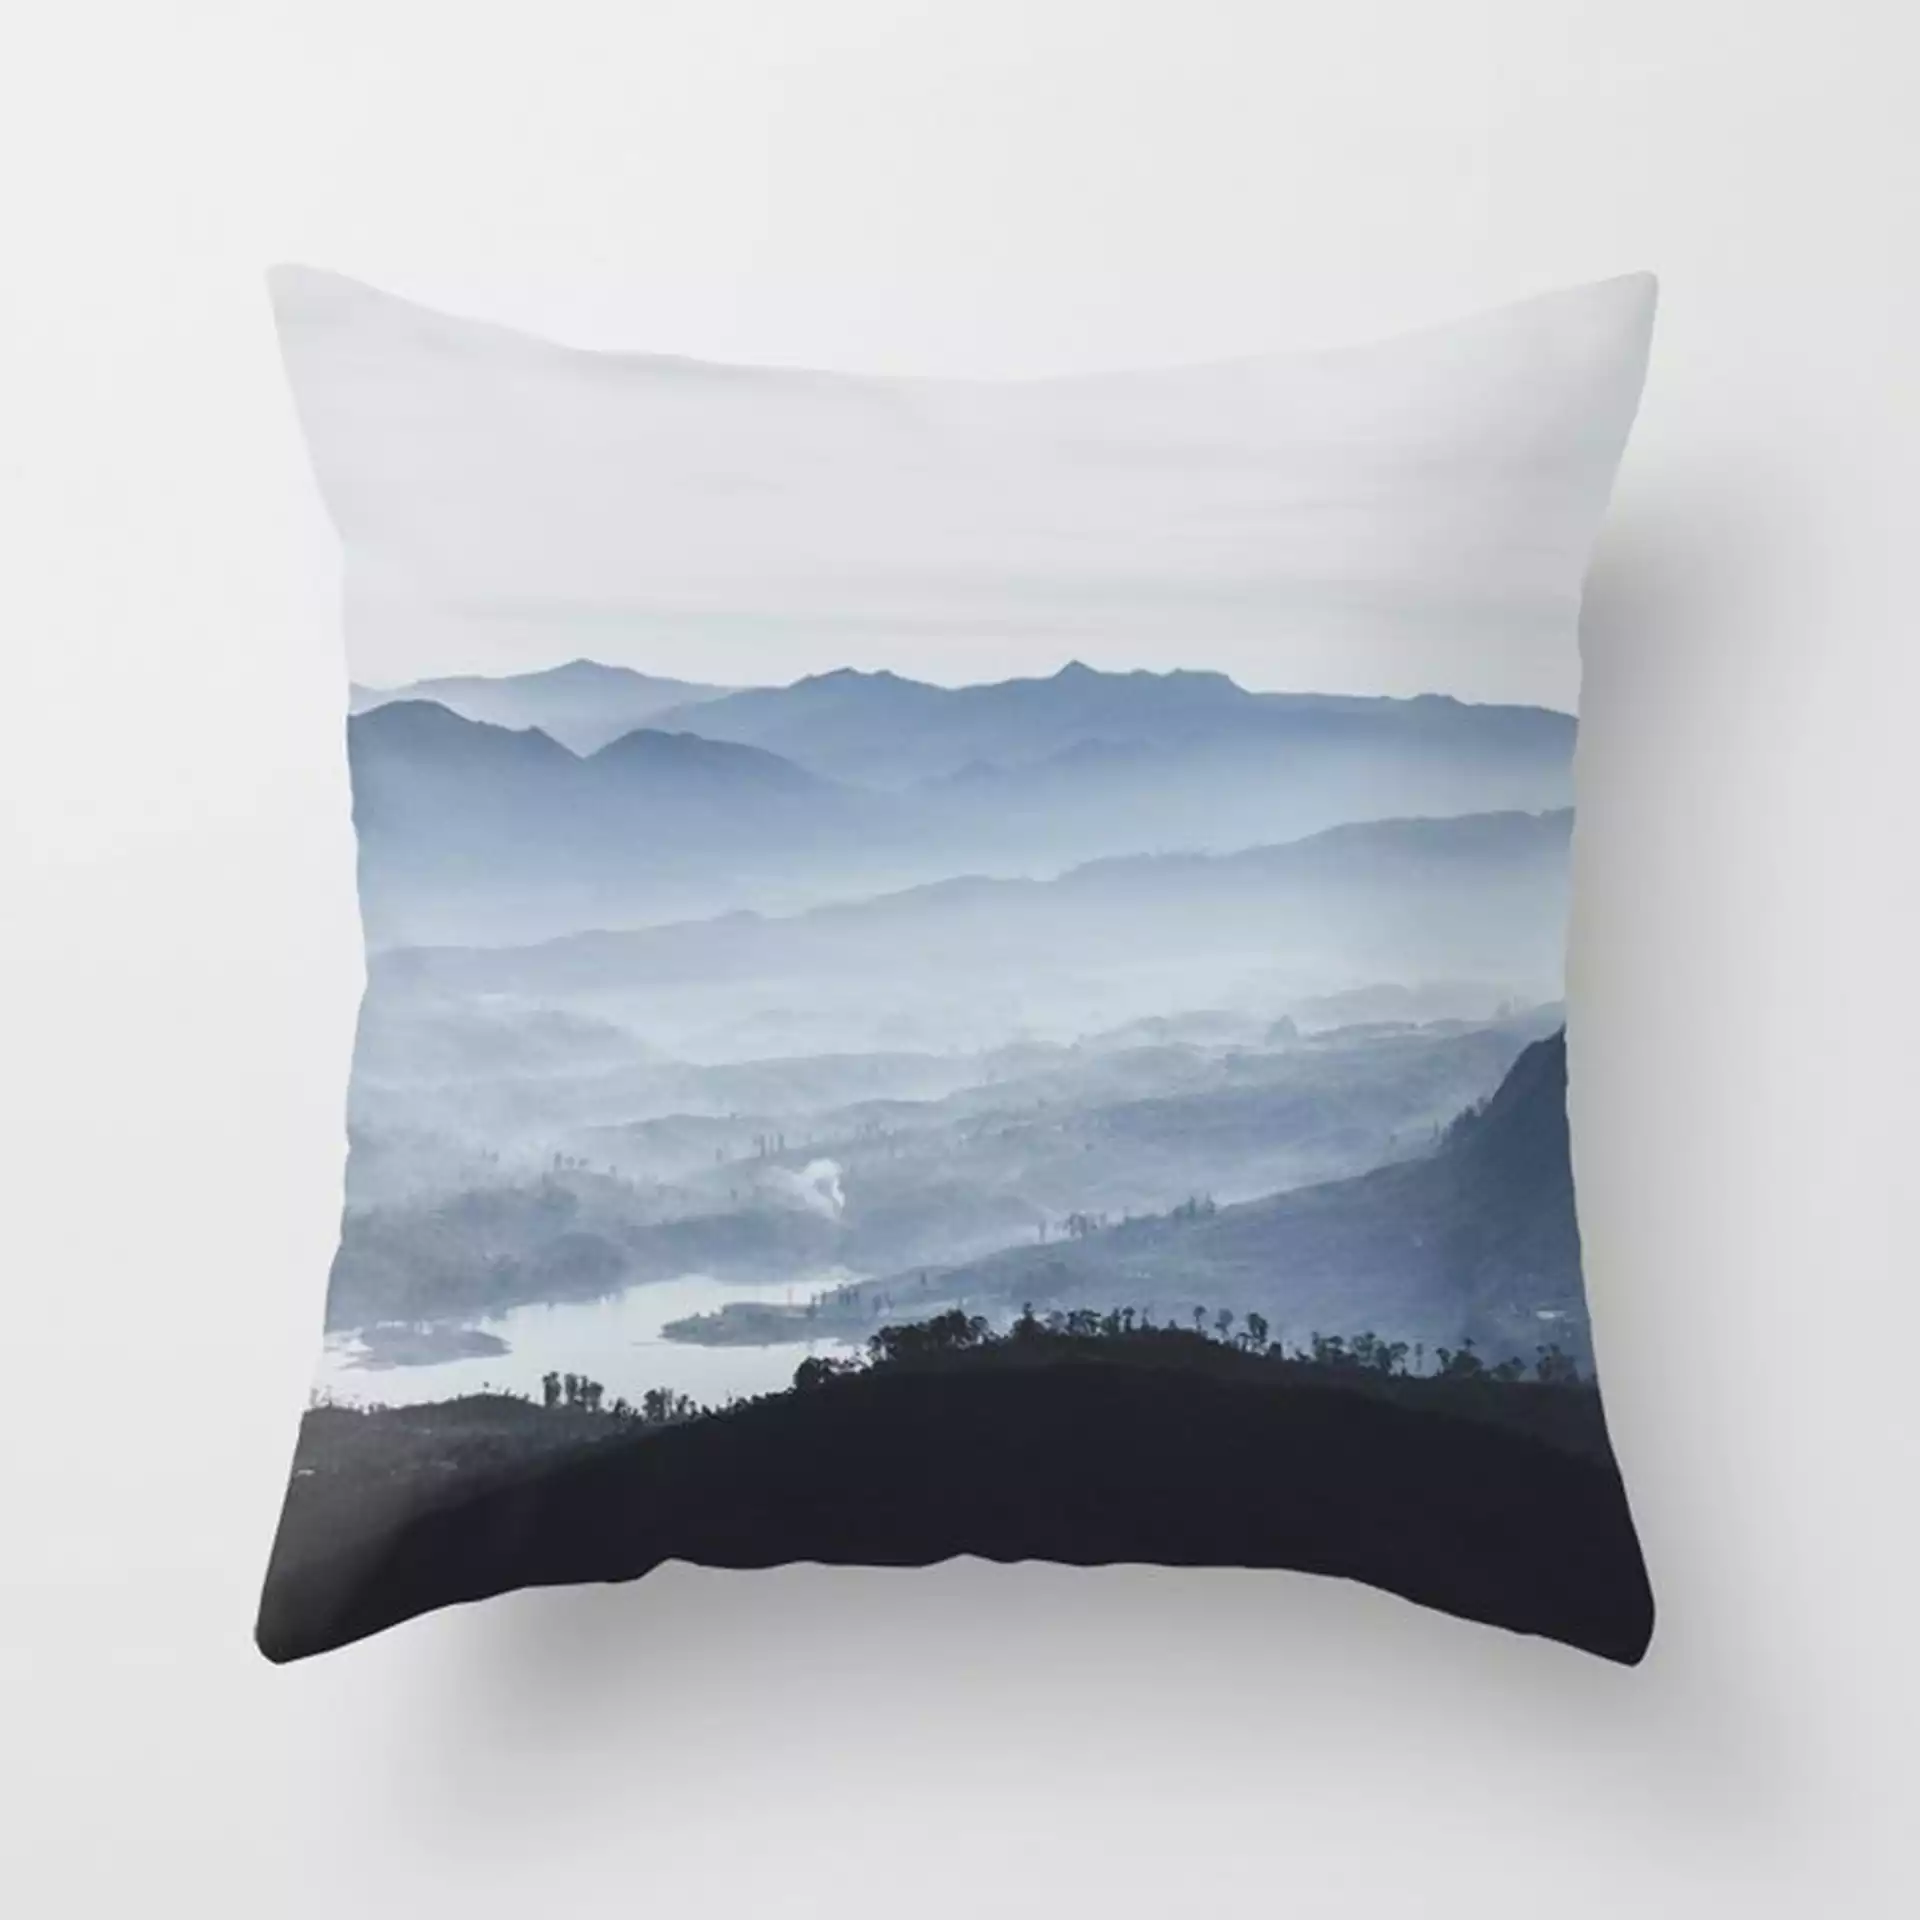 Sri Lanka Couch Throw Pillow by Luke Gram - Cover (20" x 20") with pillow insert - Indoor Pillow